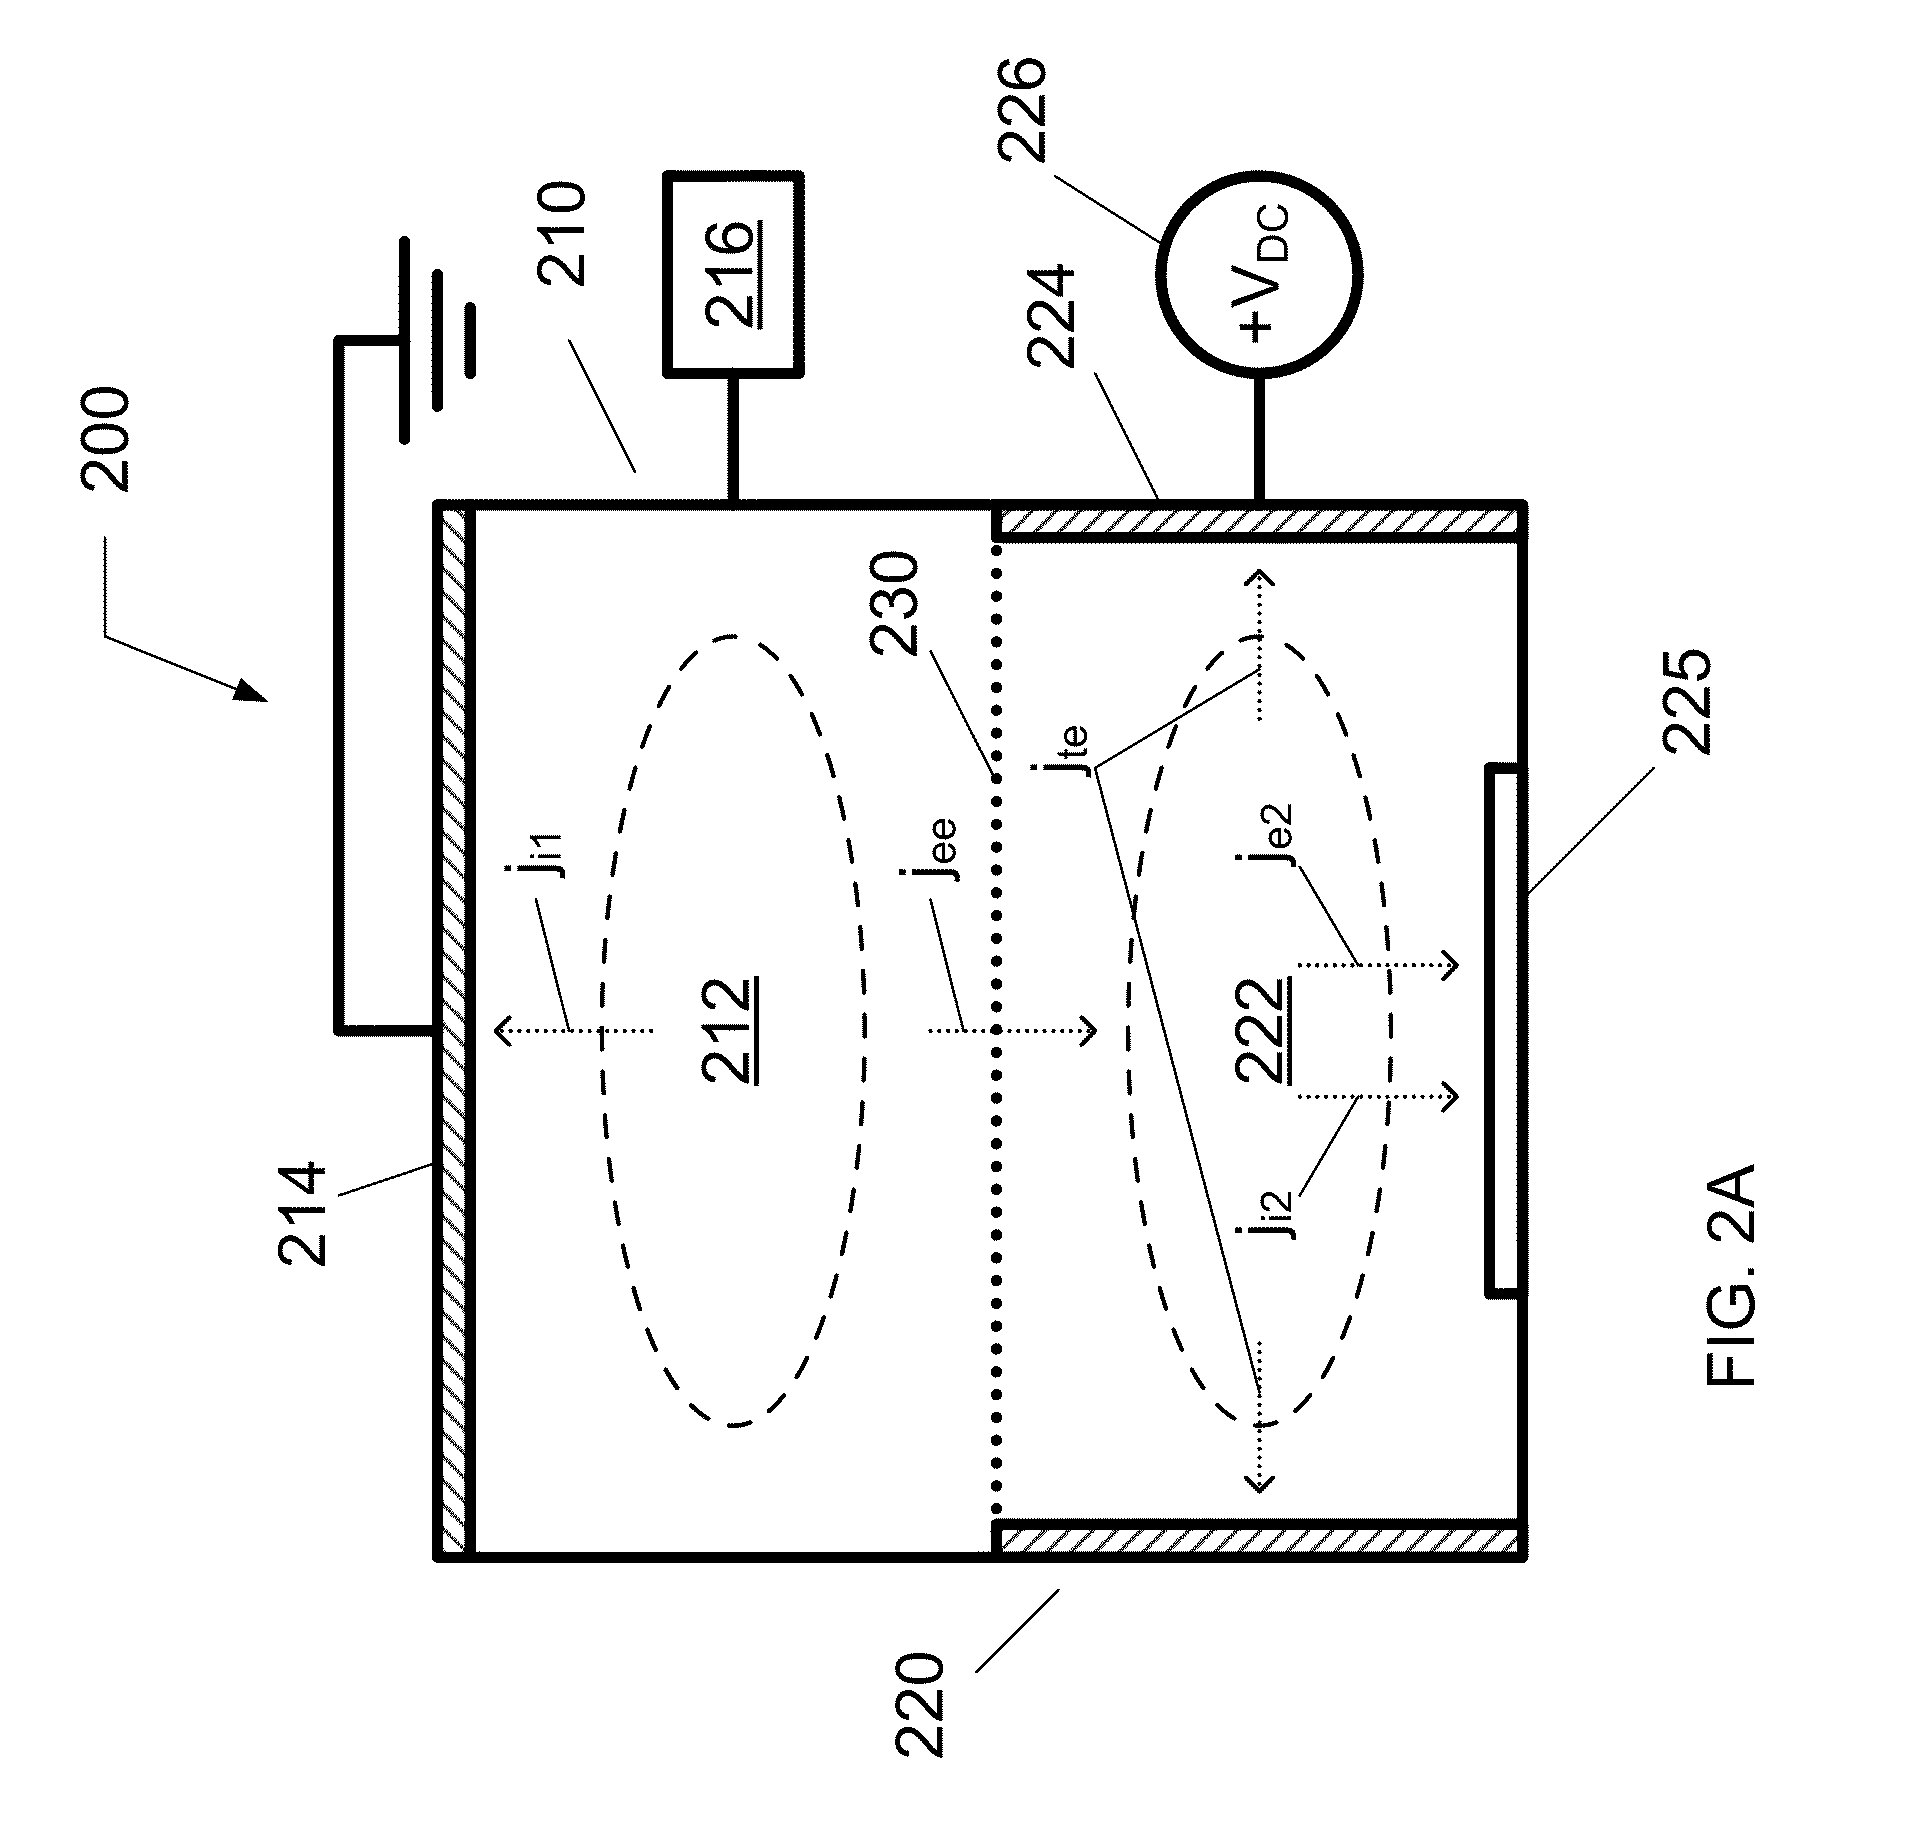 Apparatus and method for improving photoresist properties using a quasi-neutral beam